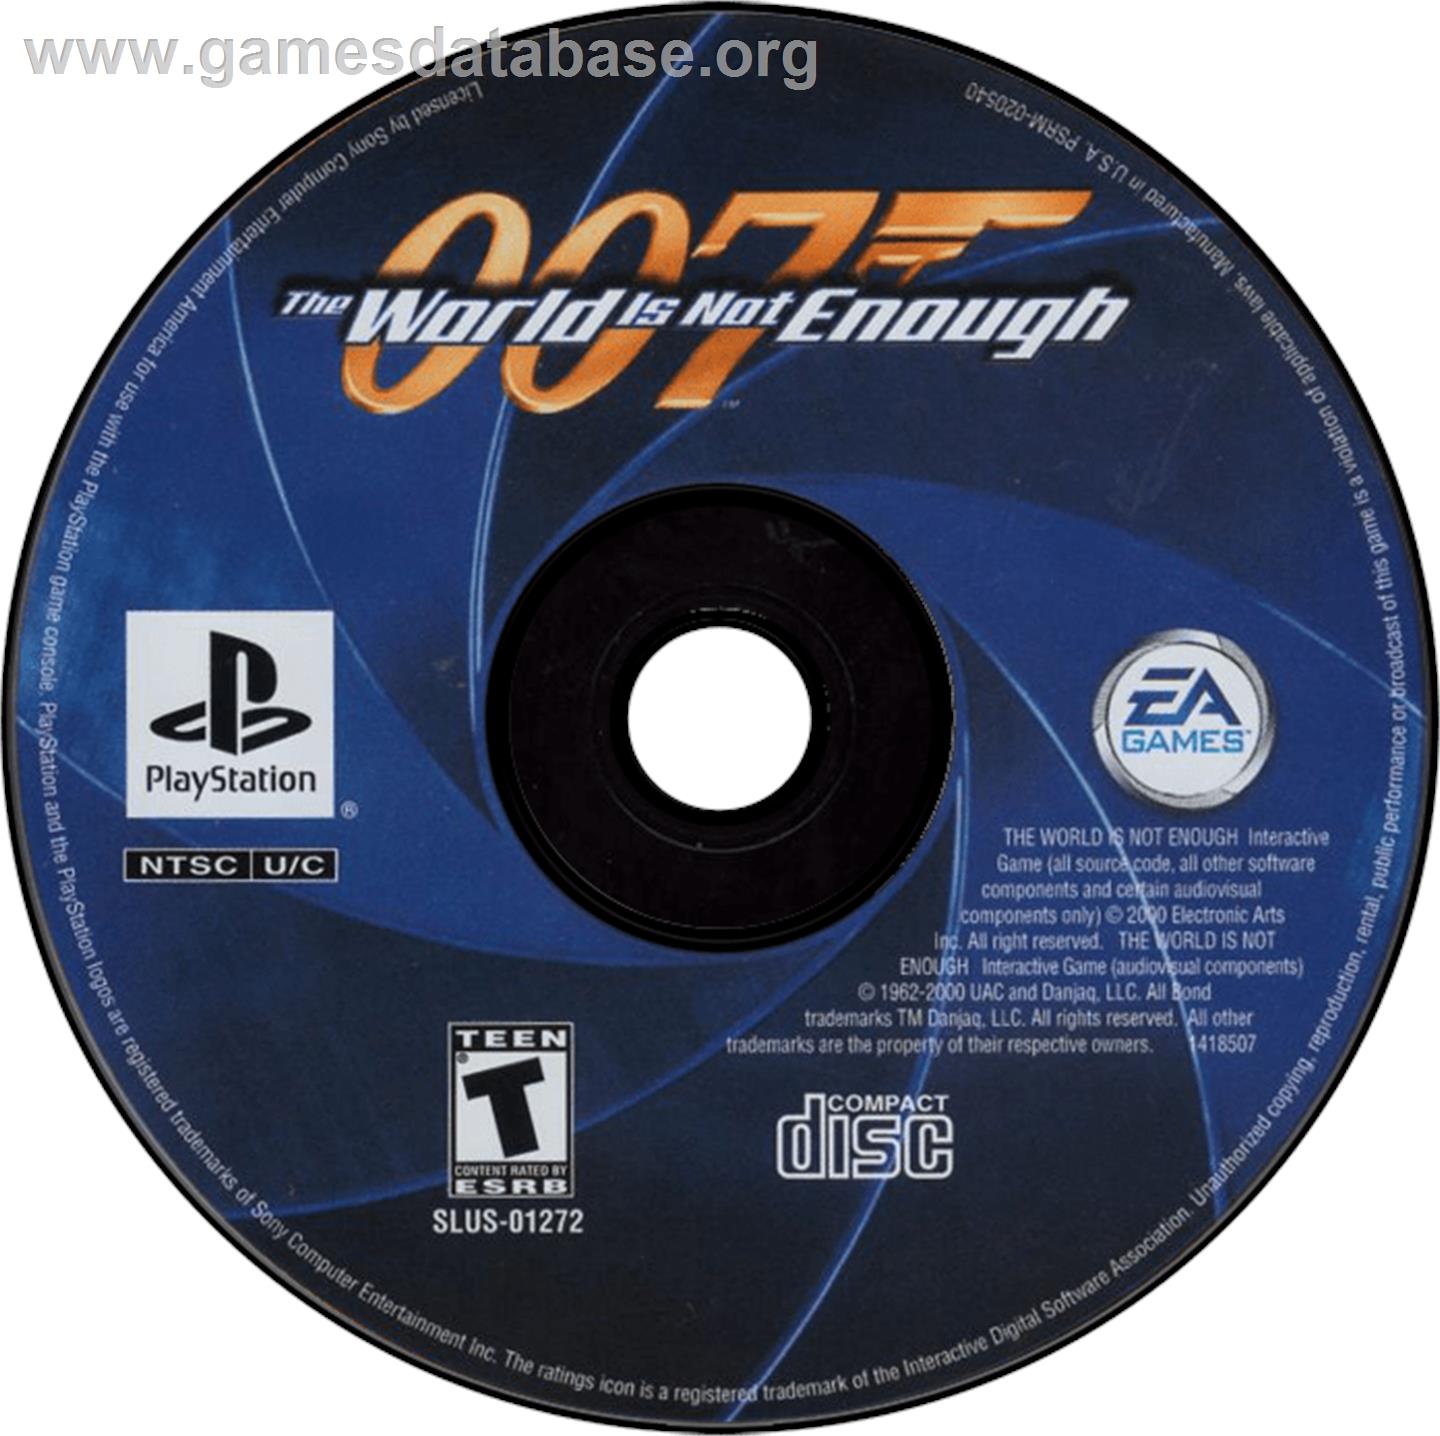 007: The World is Not Enough - Sony Playstation - Artwork - Disc